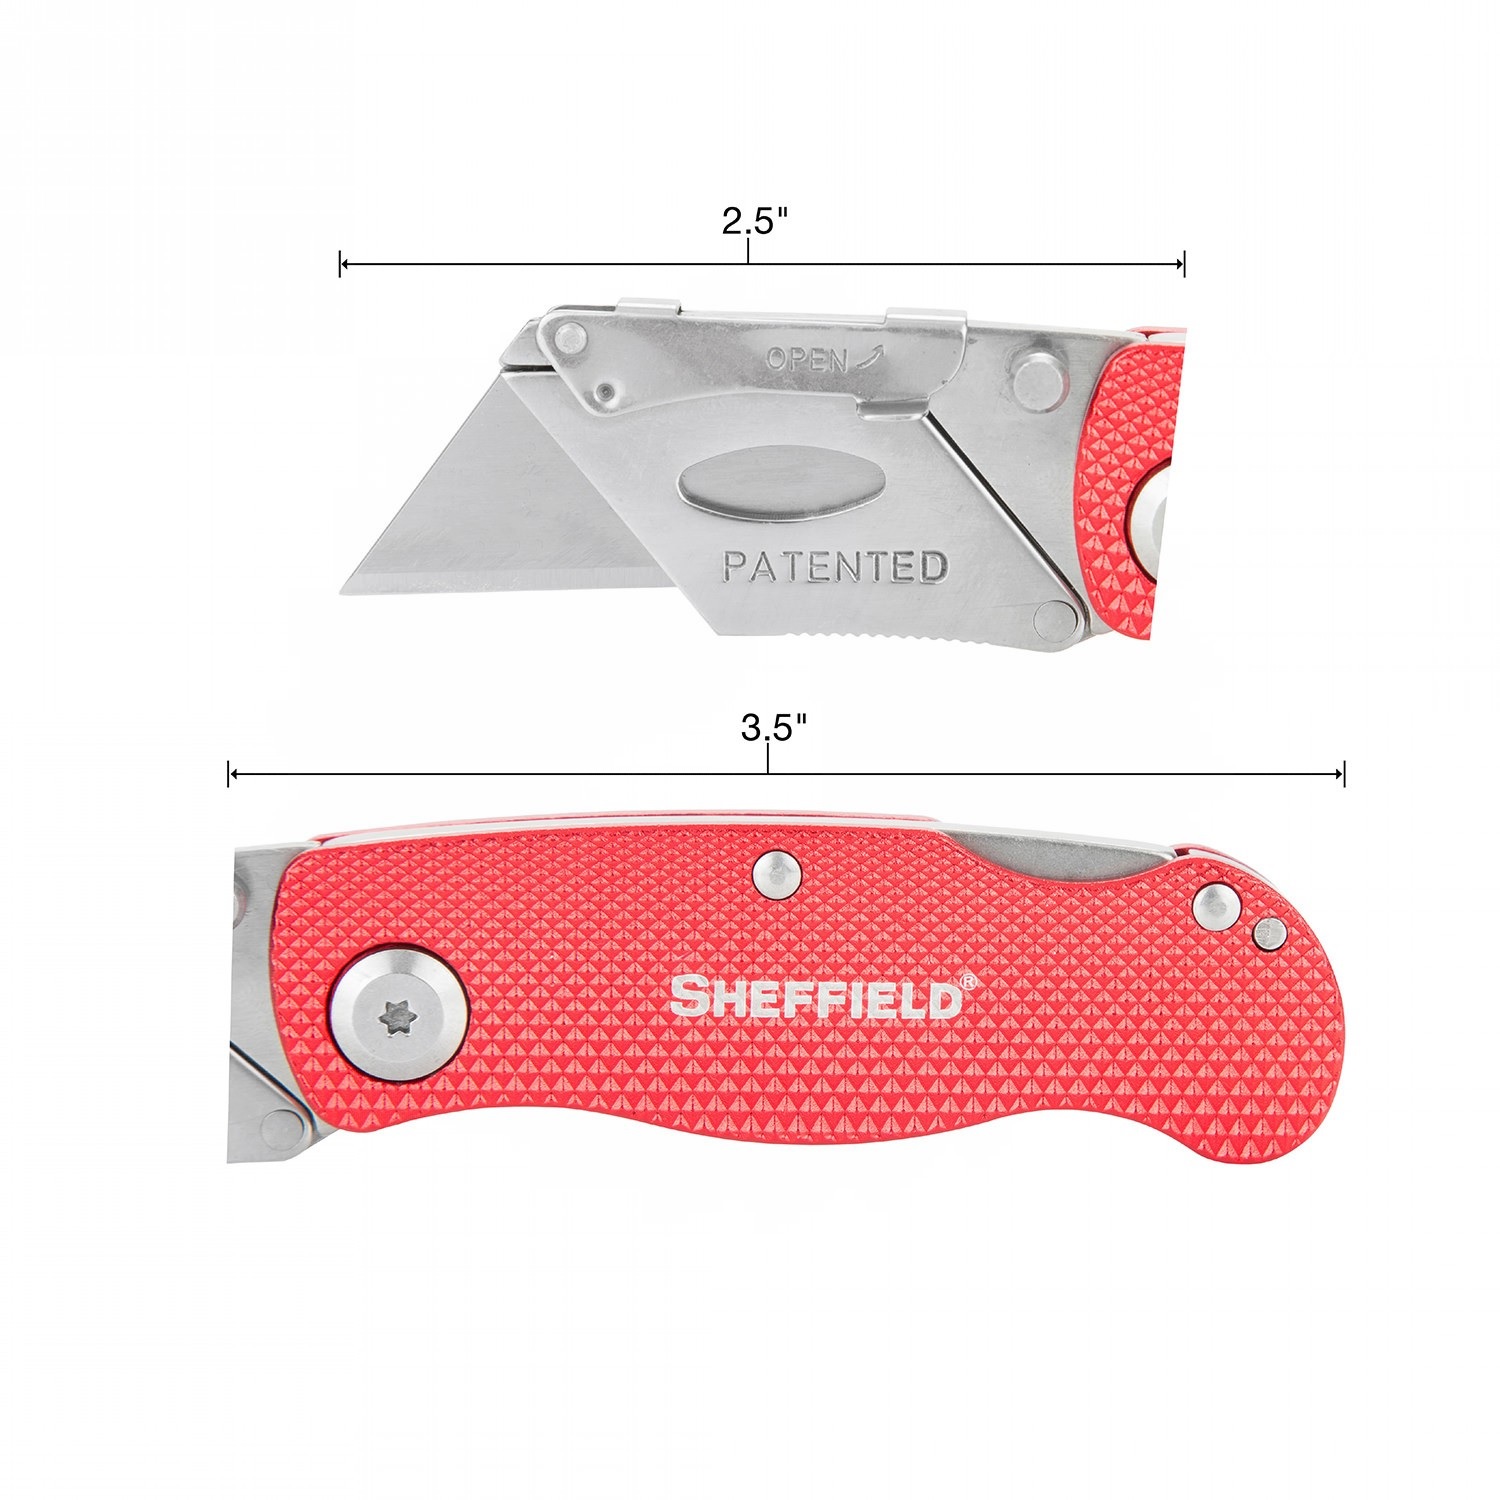 Sheffield Ultimate Utility Folder 2.5 in Blade Red Aluminum - image 2 of 3